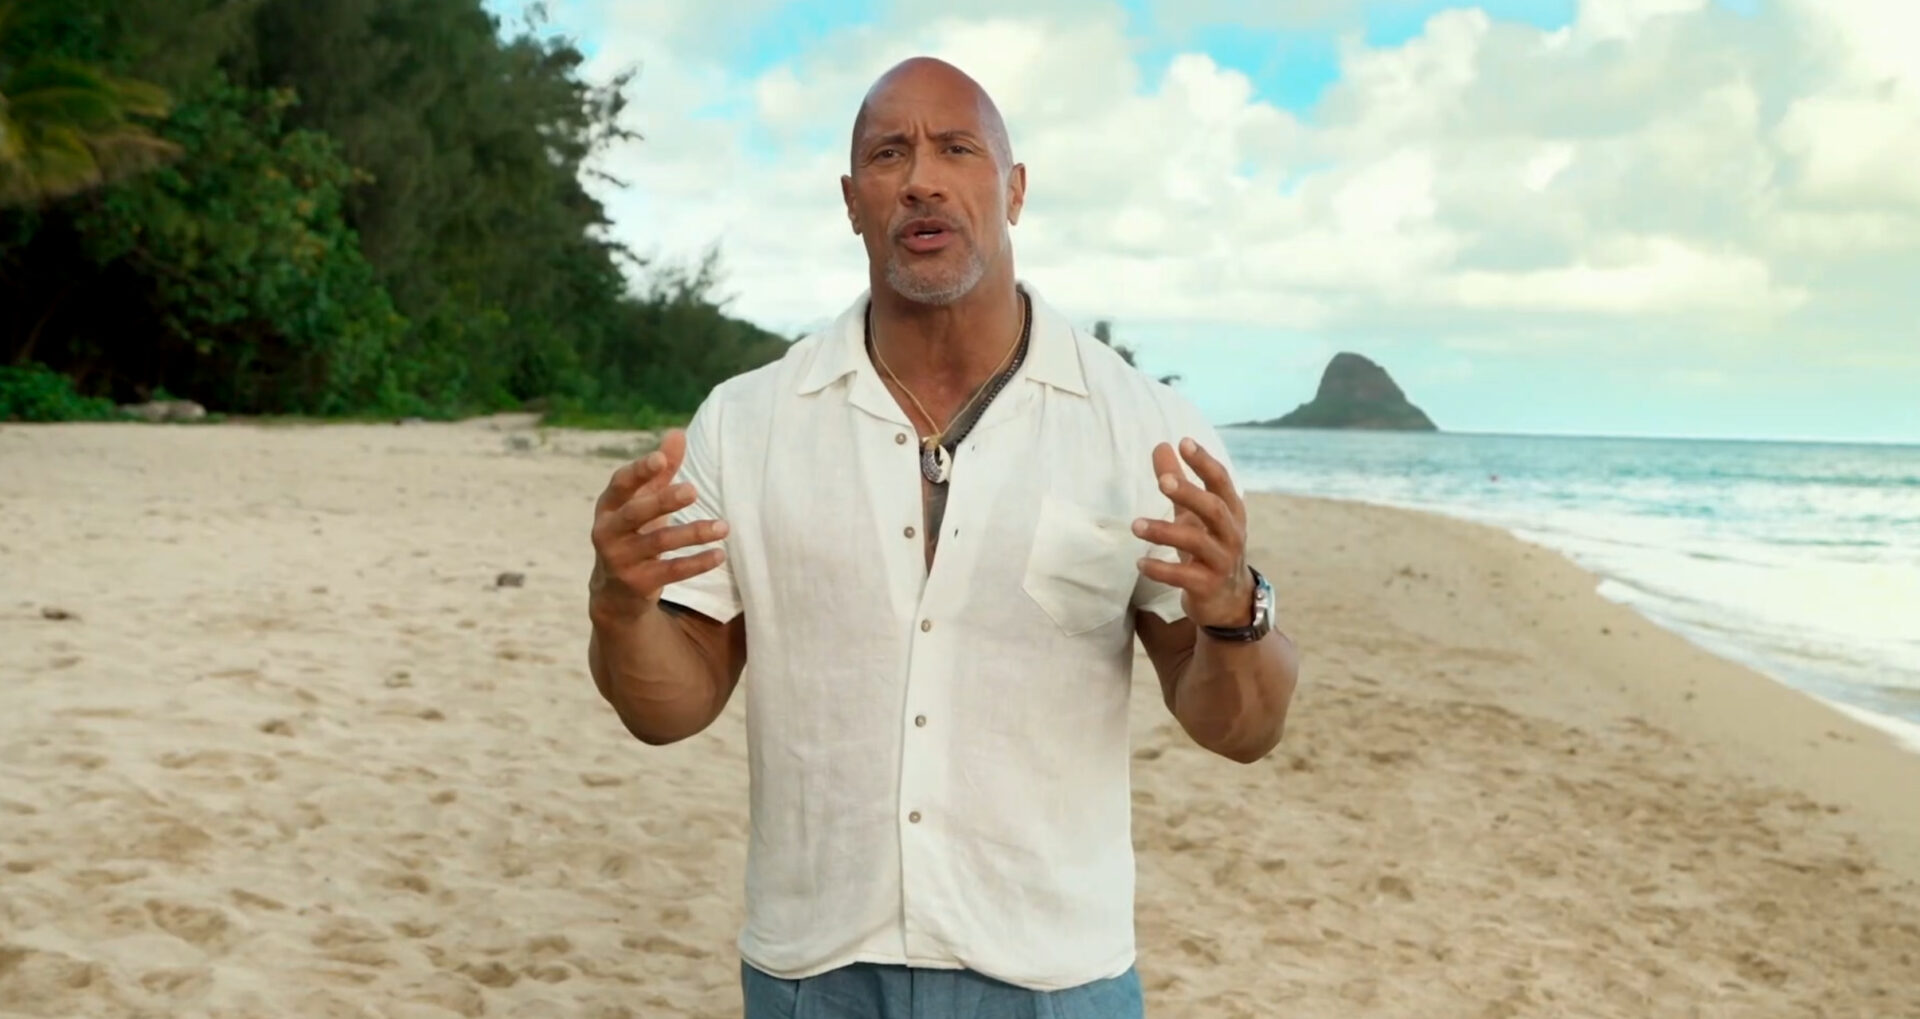 Dwayne The Rock Johnson to Play Maui in Live-Action Moana Movie